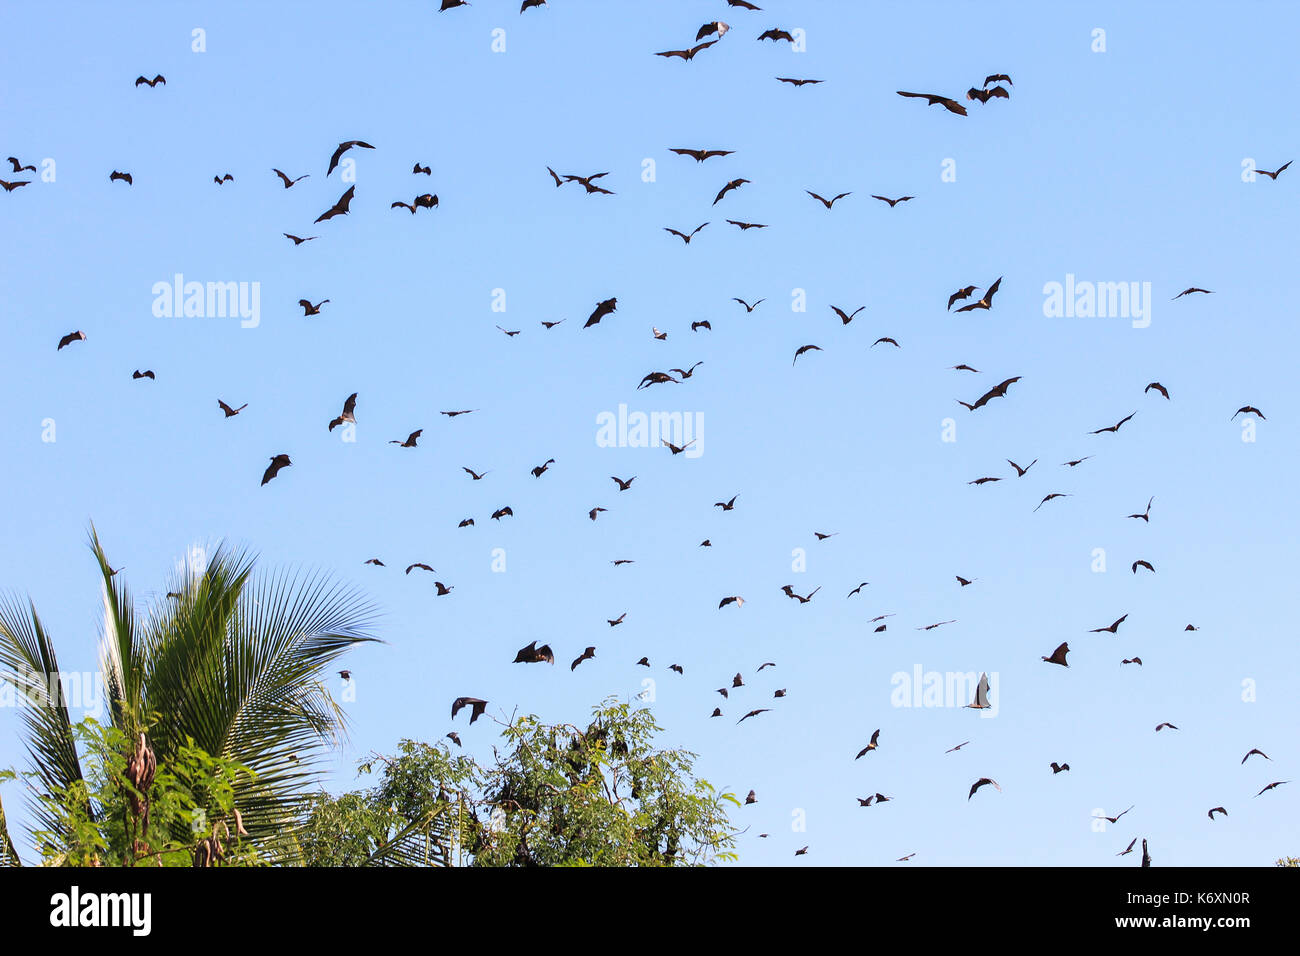 A swarm of bats flying during the day, in Sri Lanka Stock Photo - Alamy